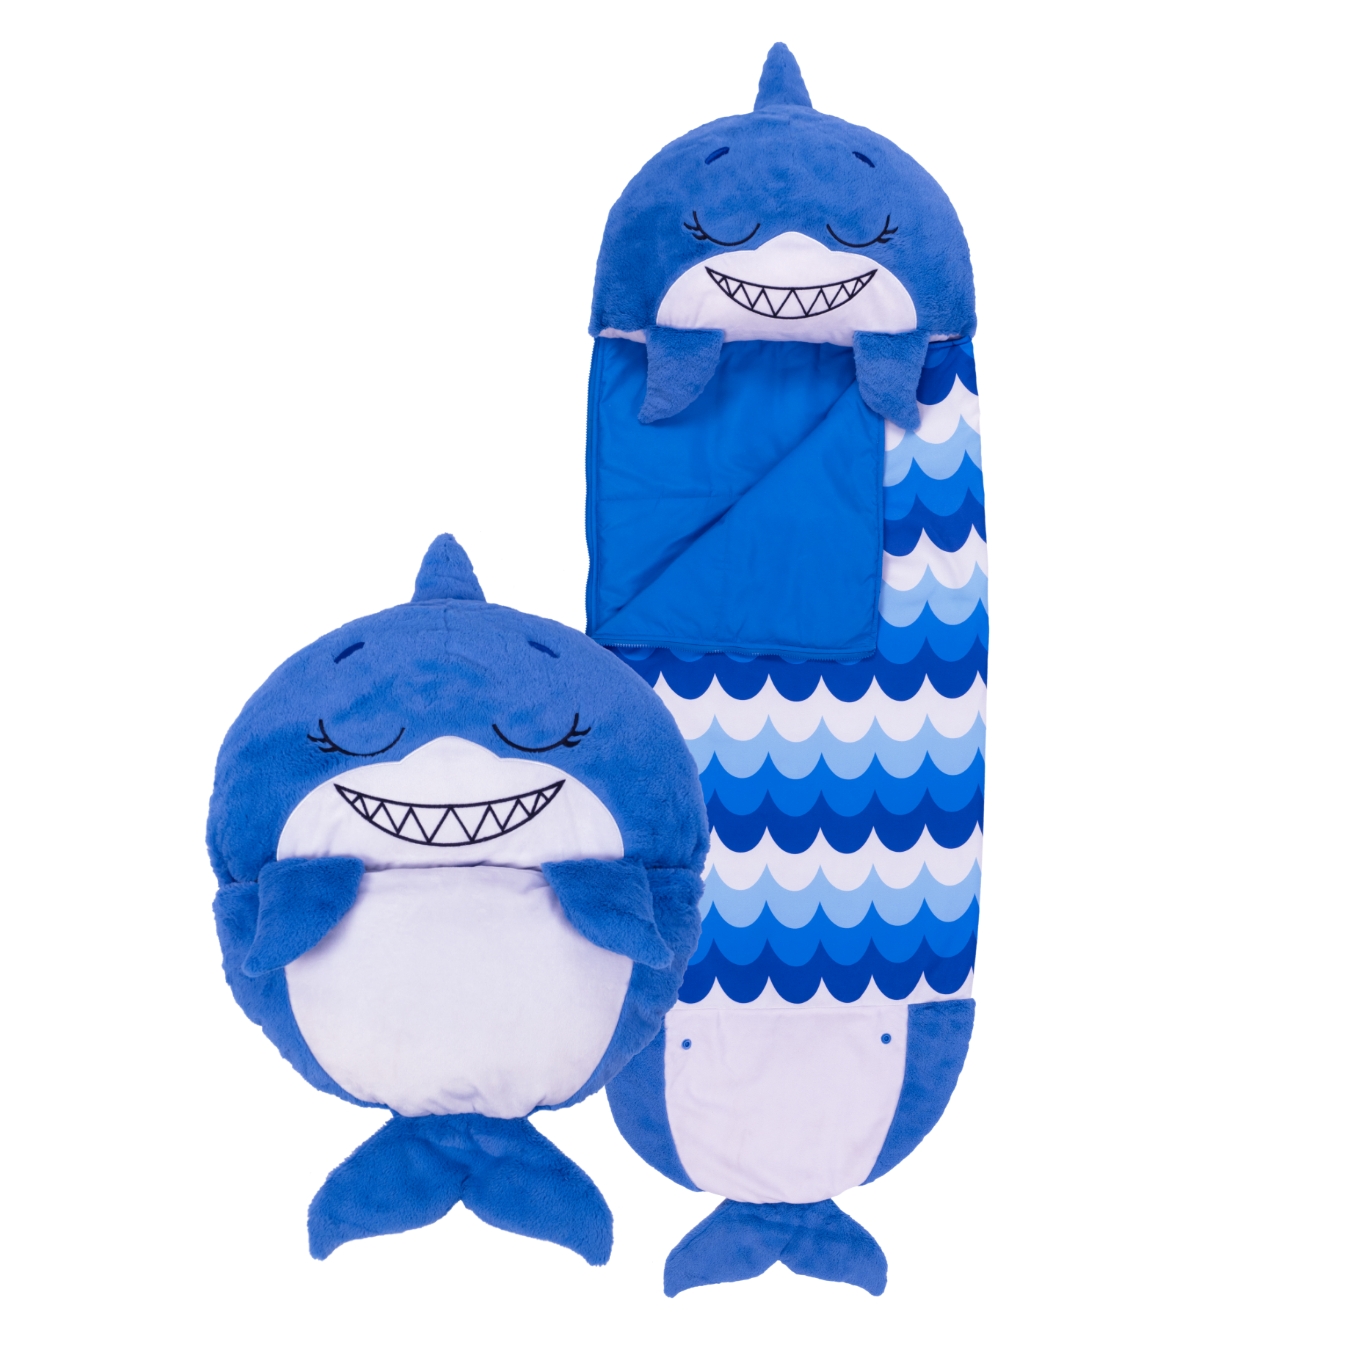 View Happy Nappers Blue Shark Medium Ages 3 to 6 Plush Toy That Opens To A Fun Sleeping Bag High Street TV information